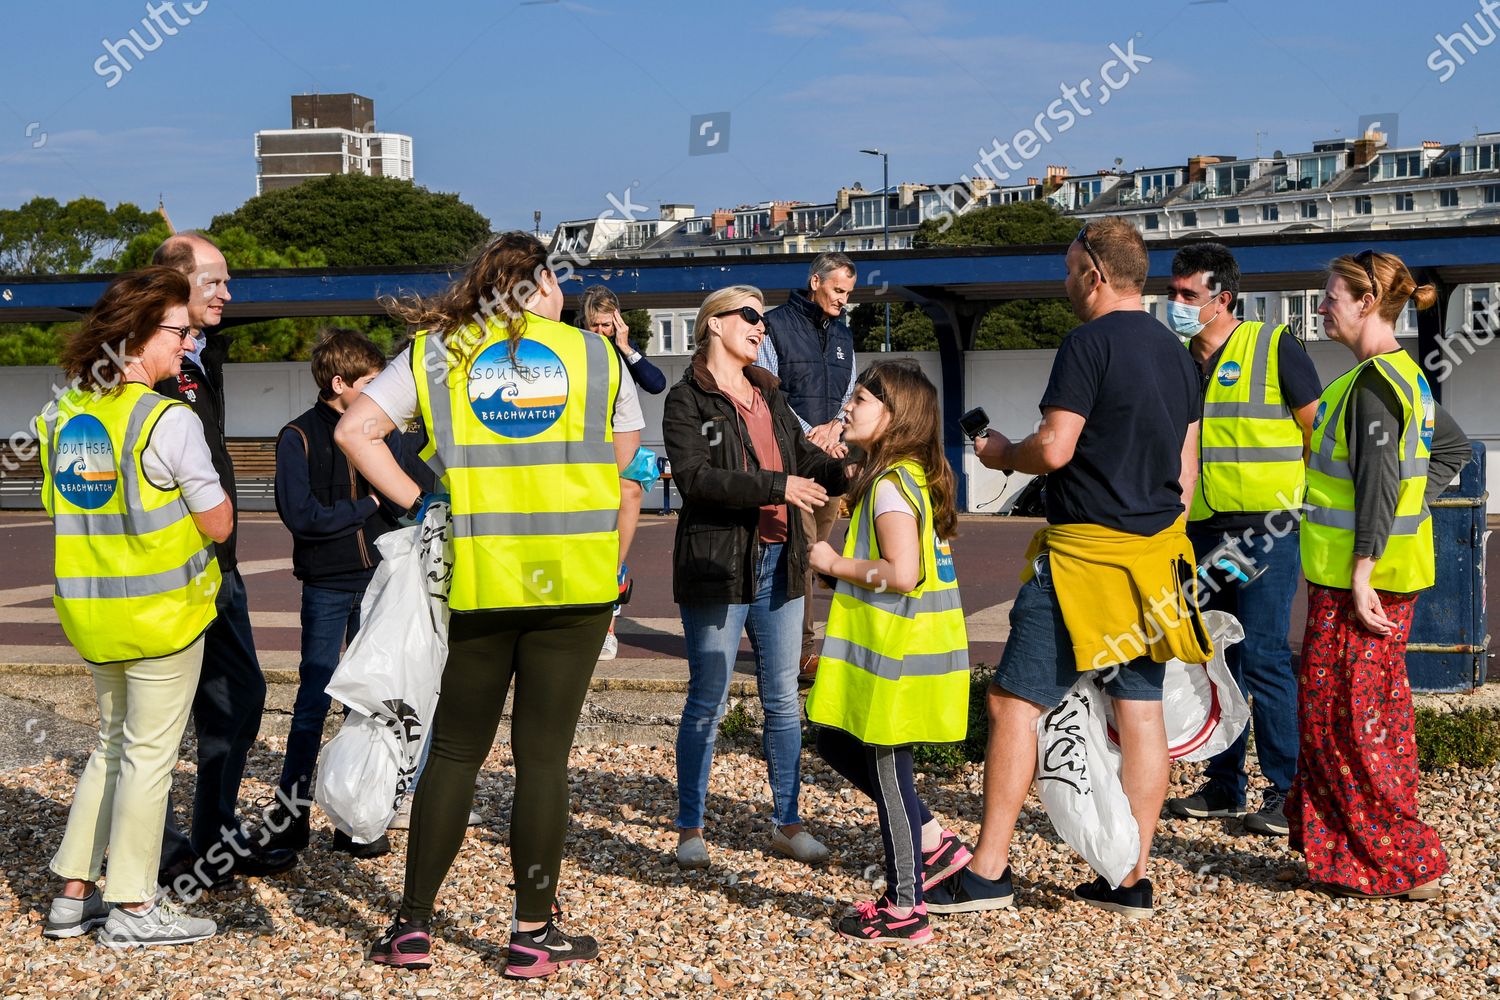 prince-edward-and-sophie-countess-of-wessex-great-british-beach-clean-southsea-beach-portsmouth-uk-shutterstock-editorial-10782998y.jpg